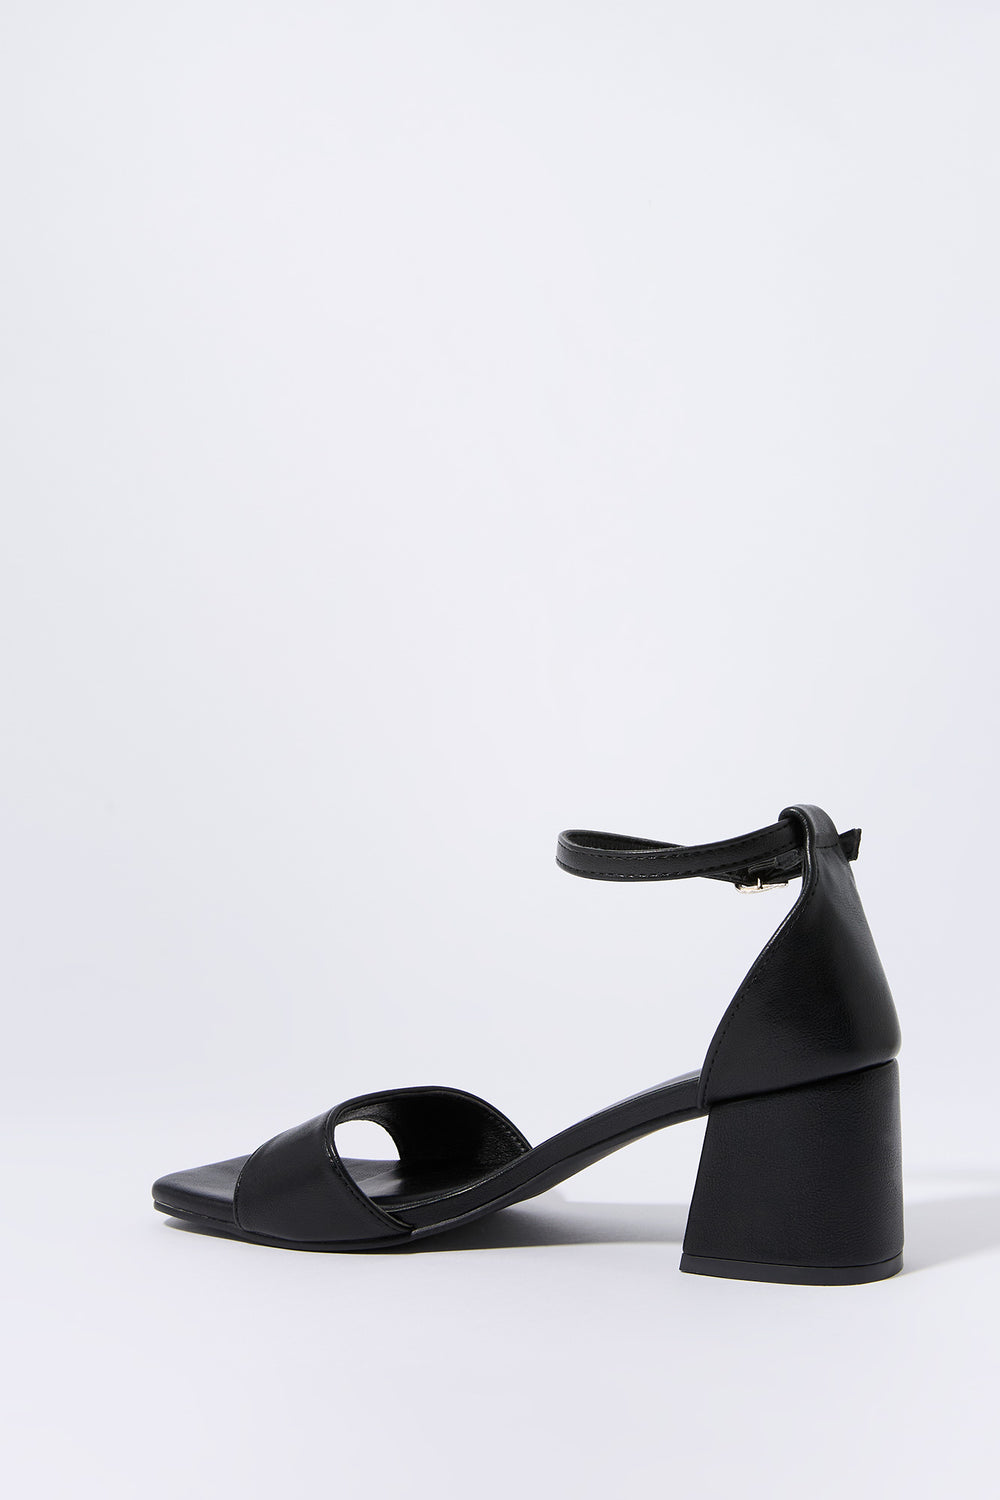 Faux Leather Ankle Strap Heel Faux Leather Ankle Strap Heel 5